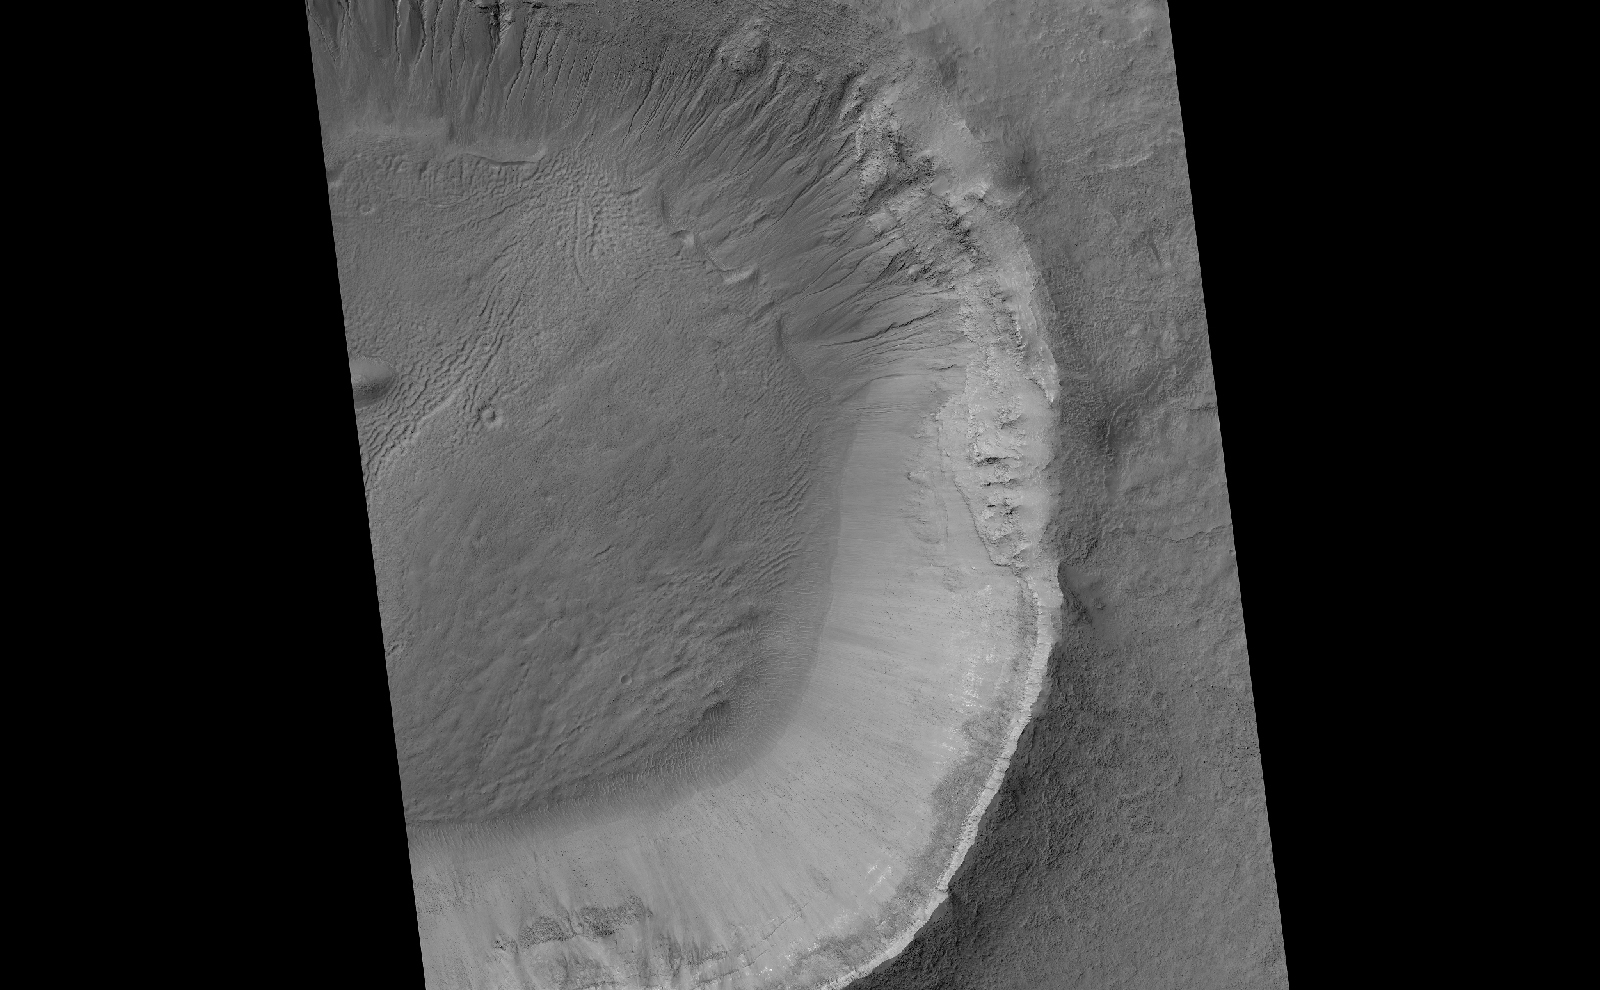 This image contrasts gullies and recurring warm-season slope flows appearing in the same crater, in the middle southern latitudes of Mars.